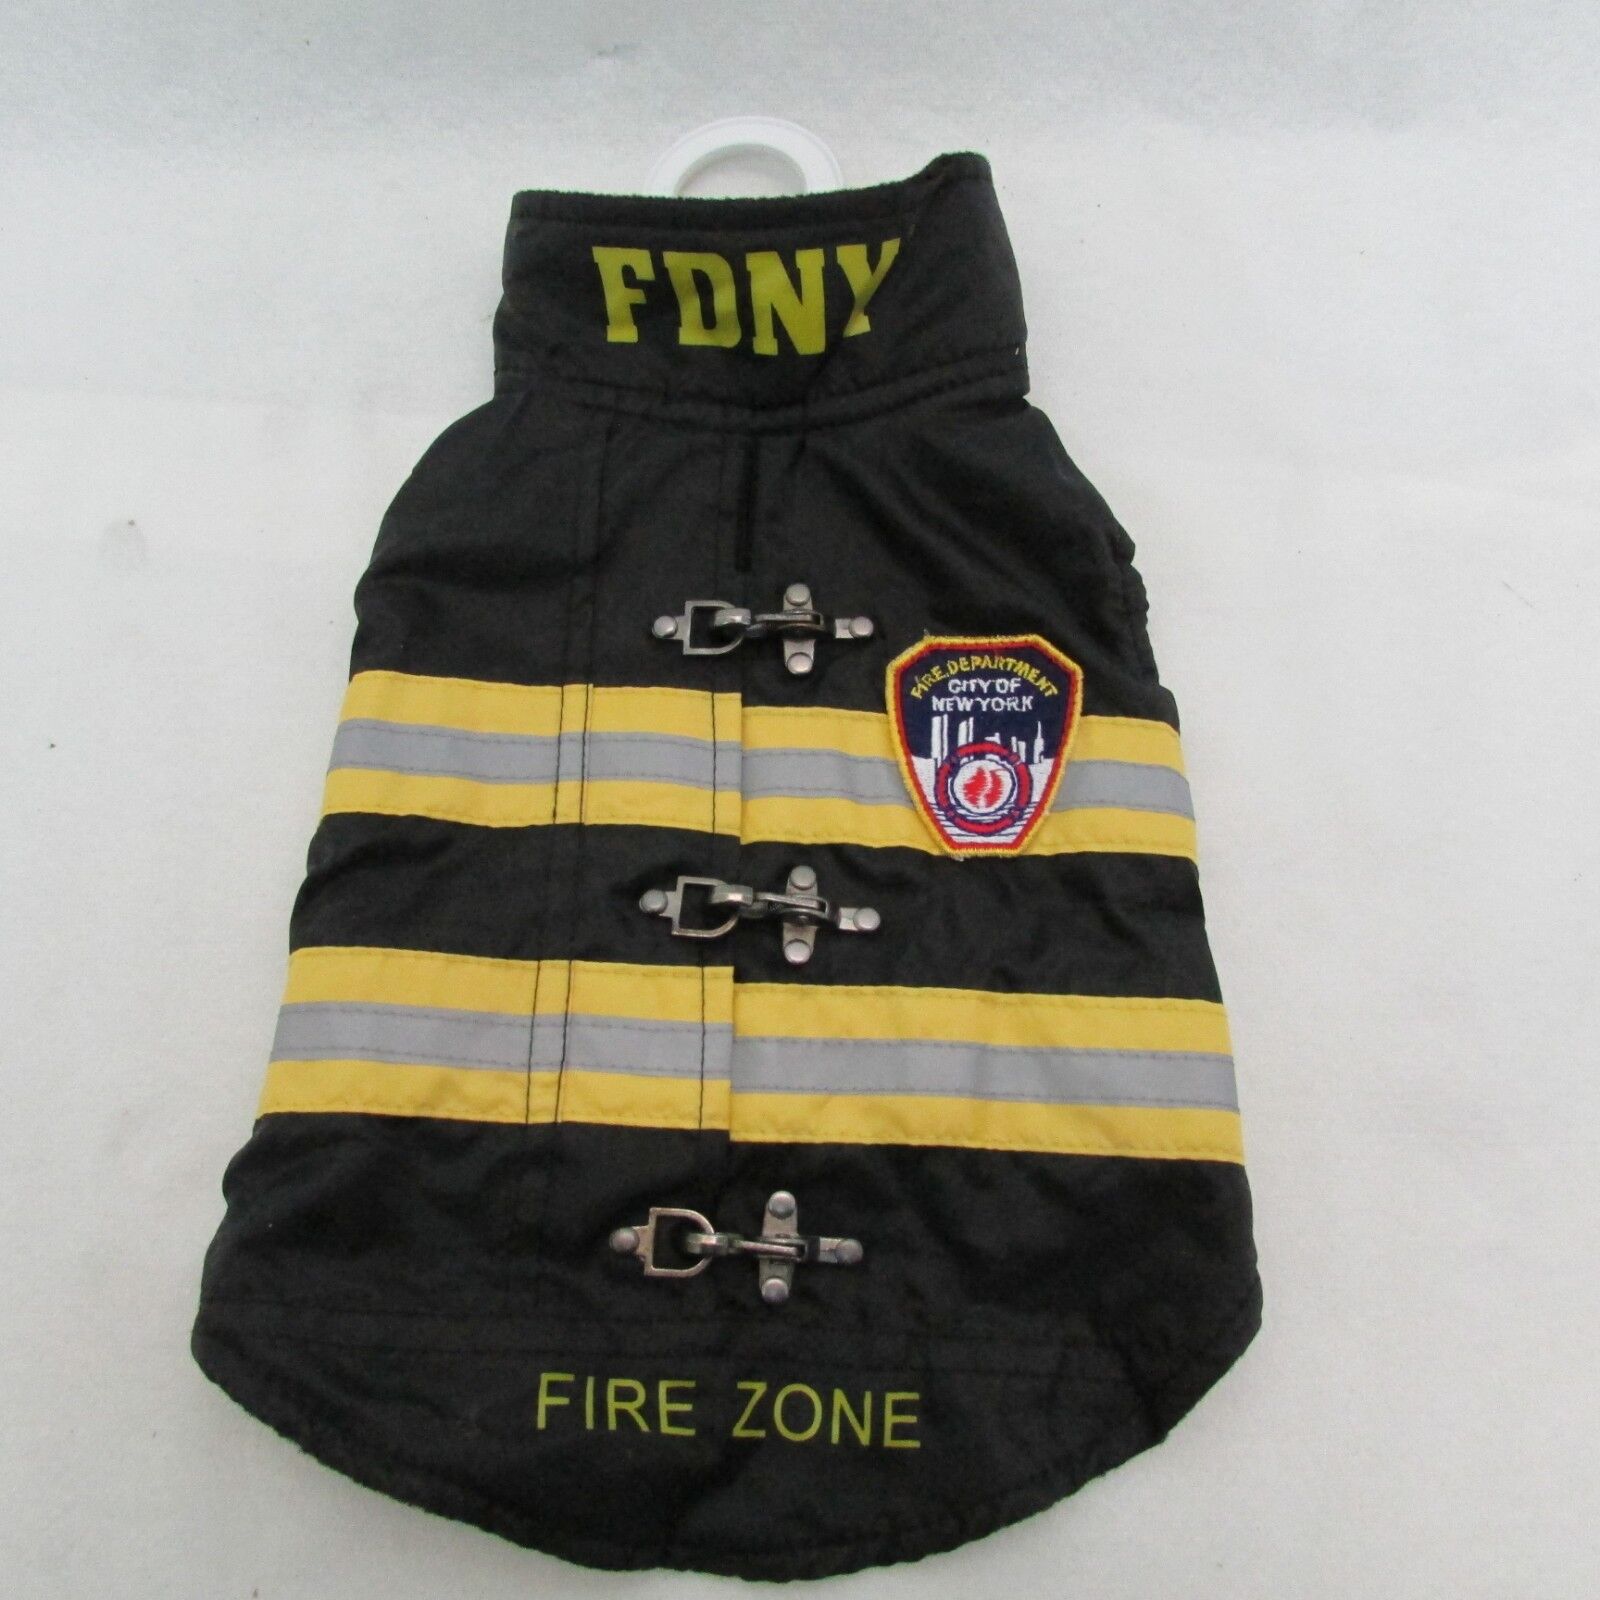 ROYAL ANIMALS AUTHENTIC WATER-RESISTANT FDNY FIRE DEPT DOG COAT Size XS, S, M, L